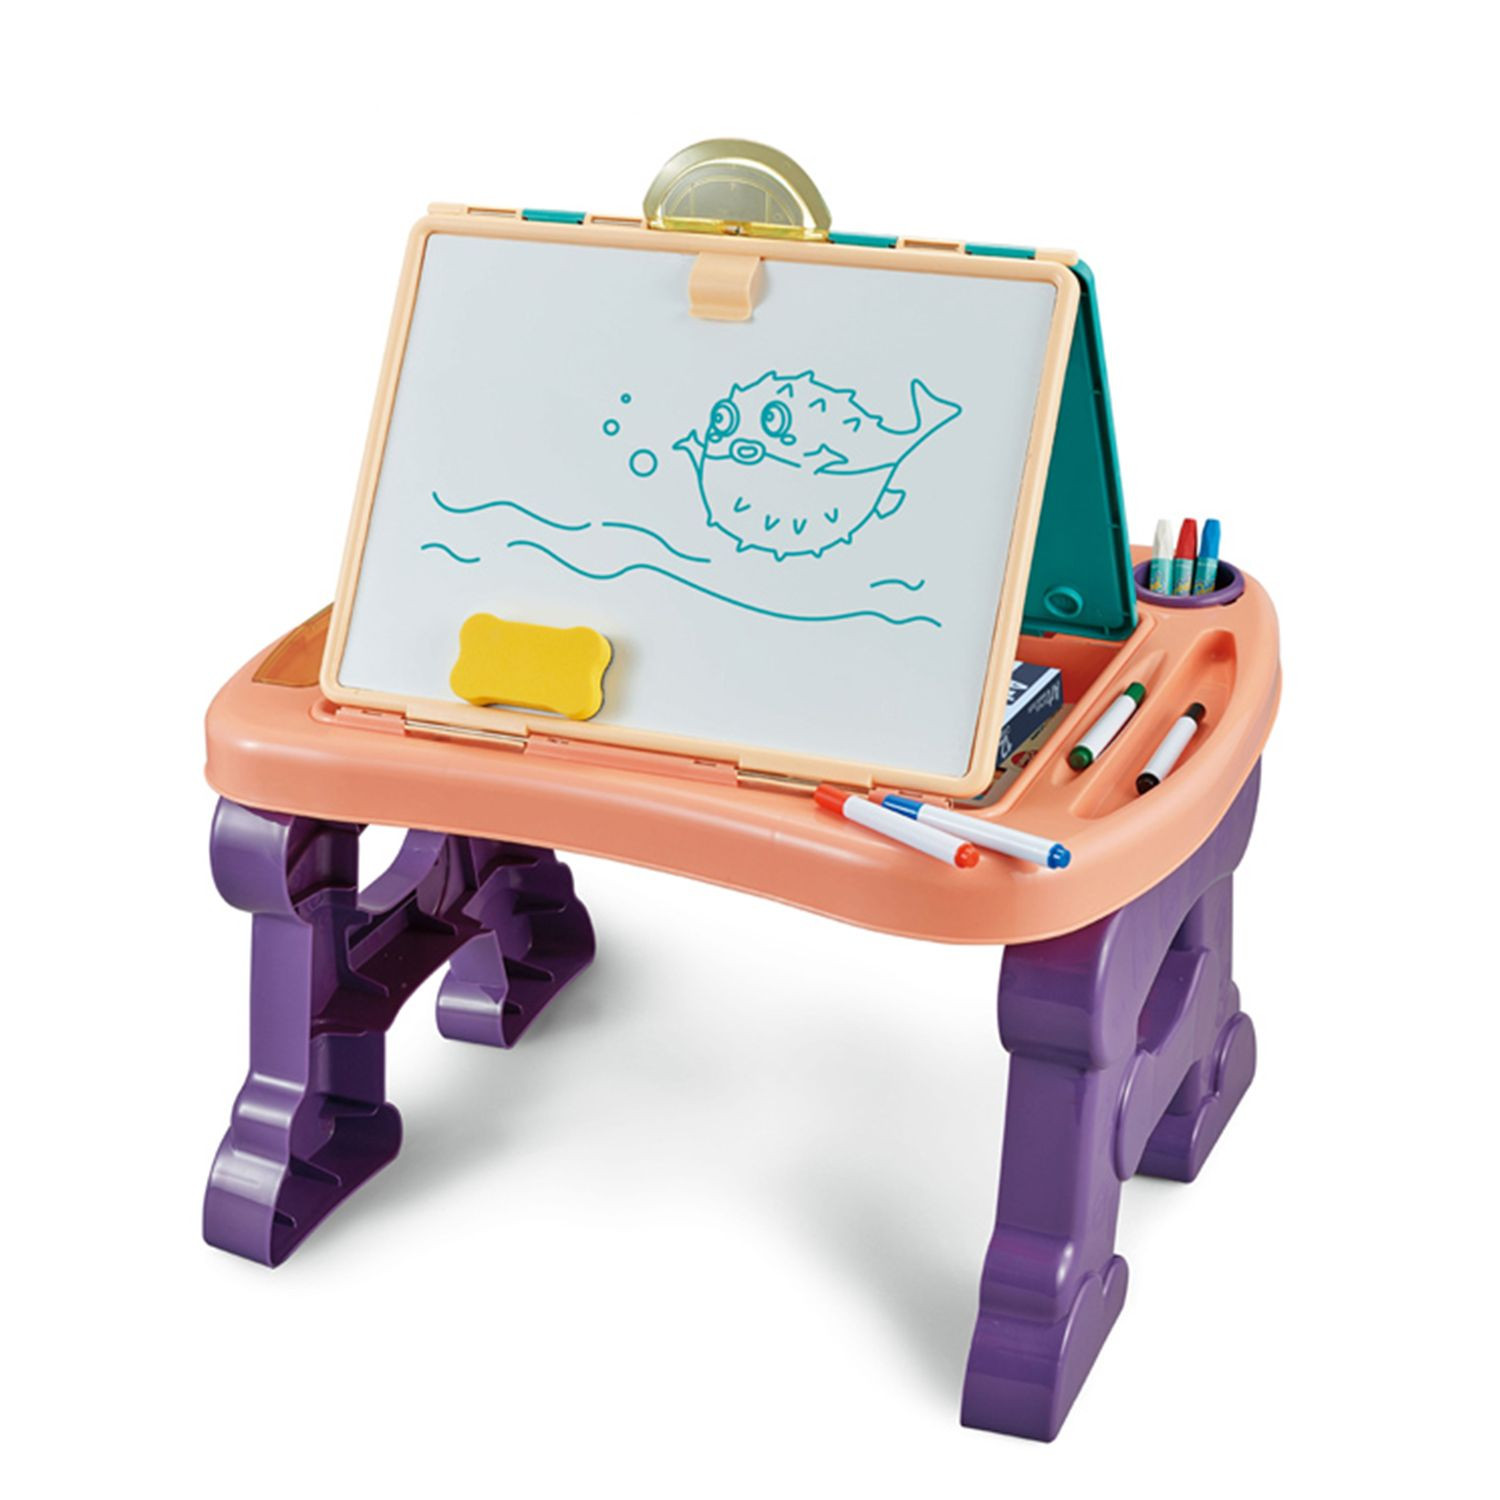 Educational Art Painting Learning Table Writing Drawing Boards for Kids